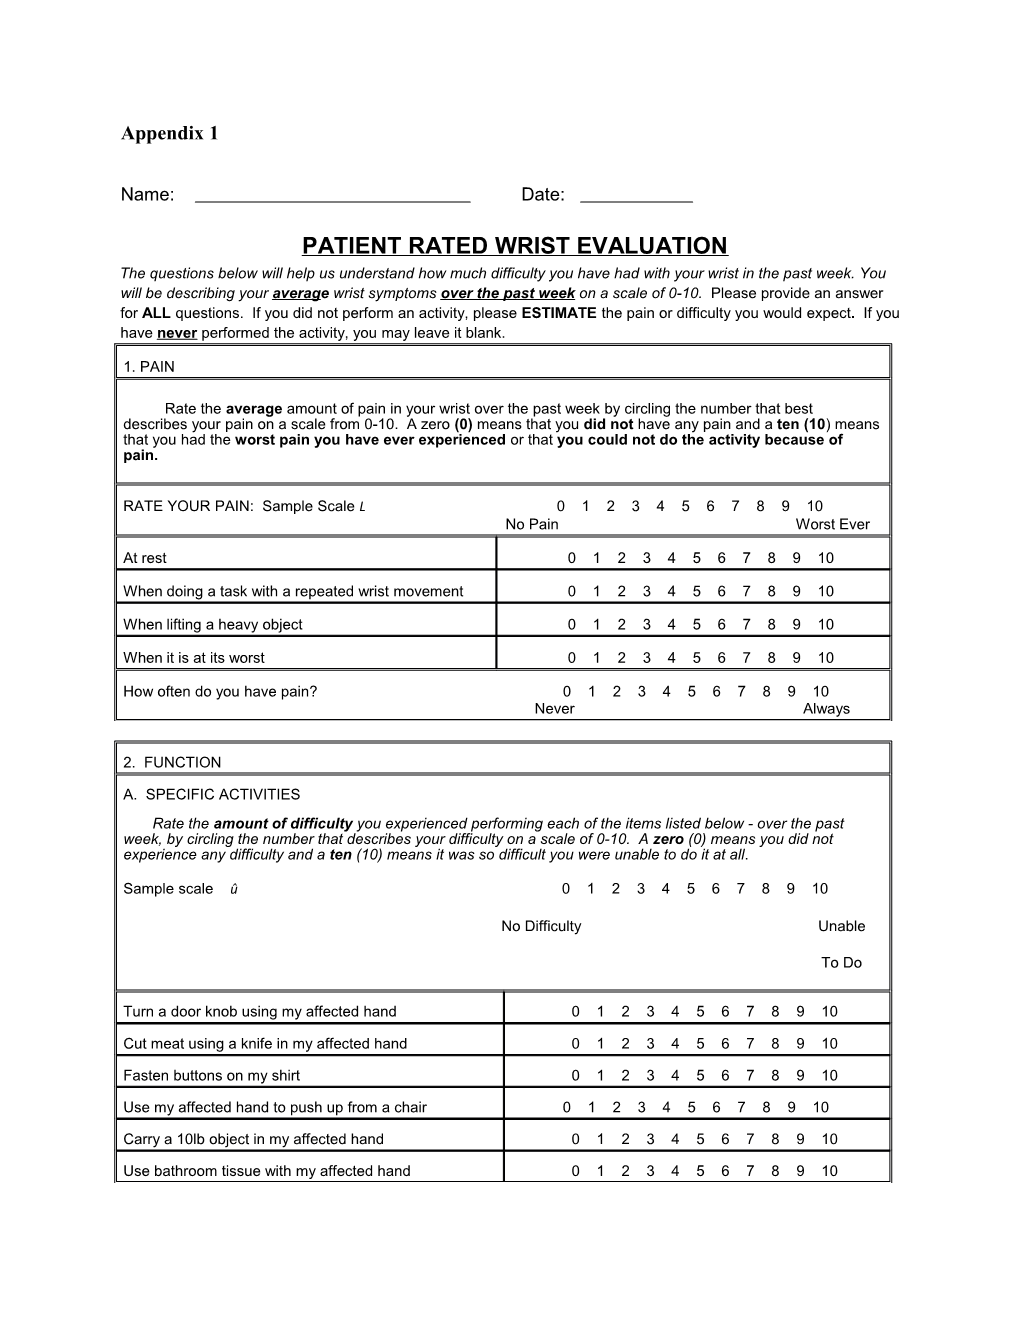 Patient Rated Wrist Evaluation